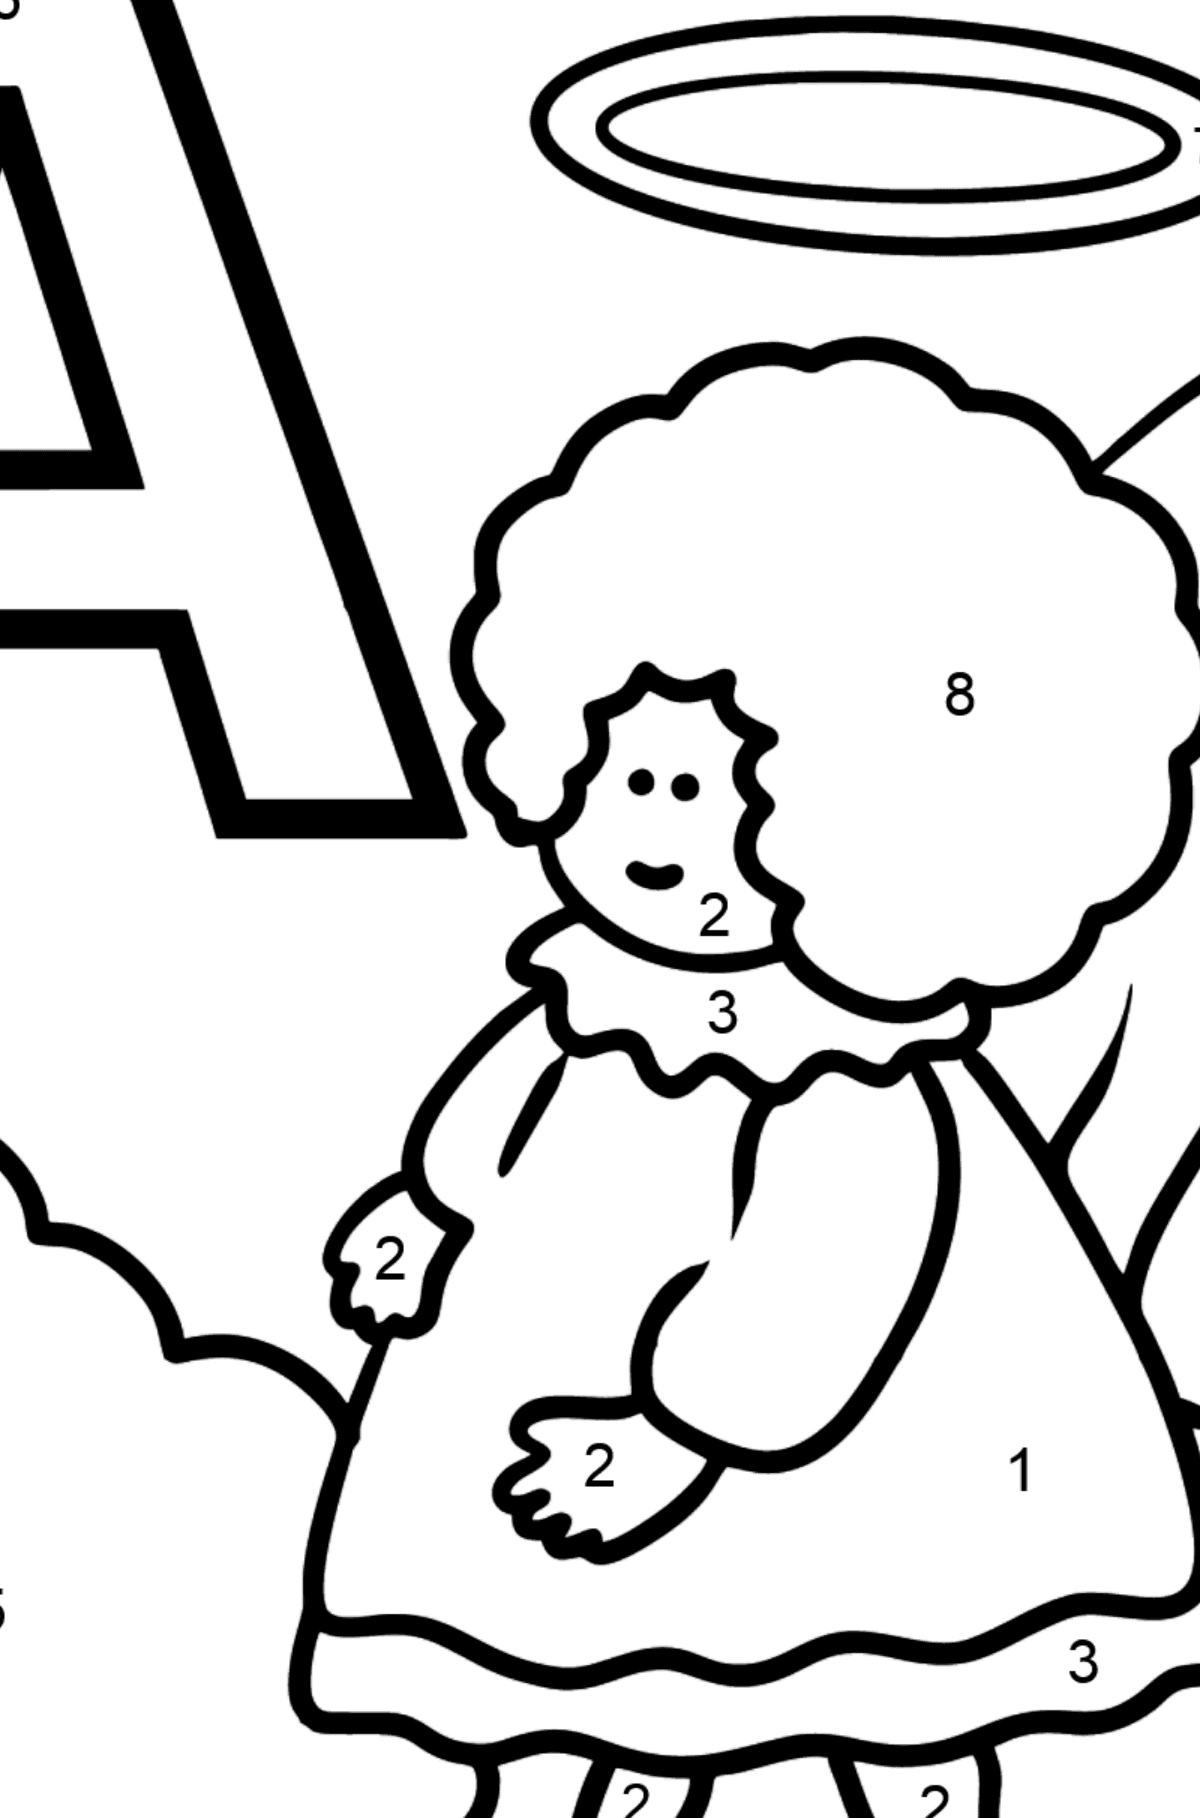 Spanish Letter A coloring pages - ÁNGEL - Coloring by Numbers for Kids